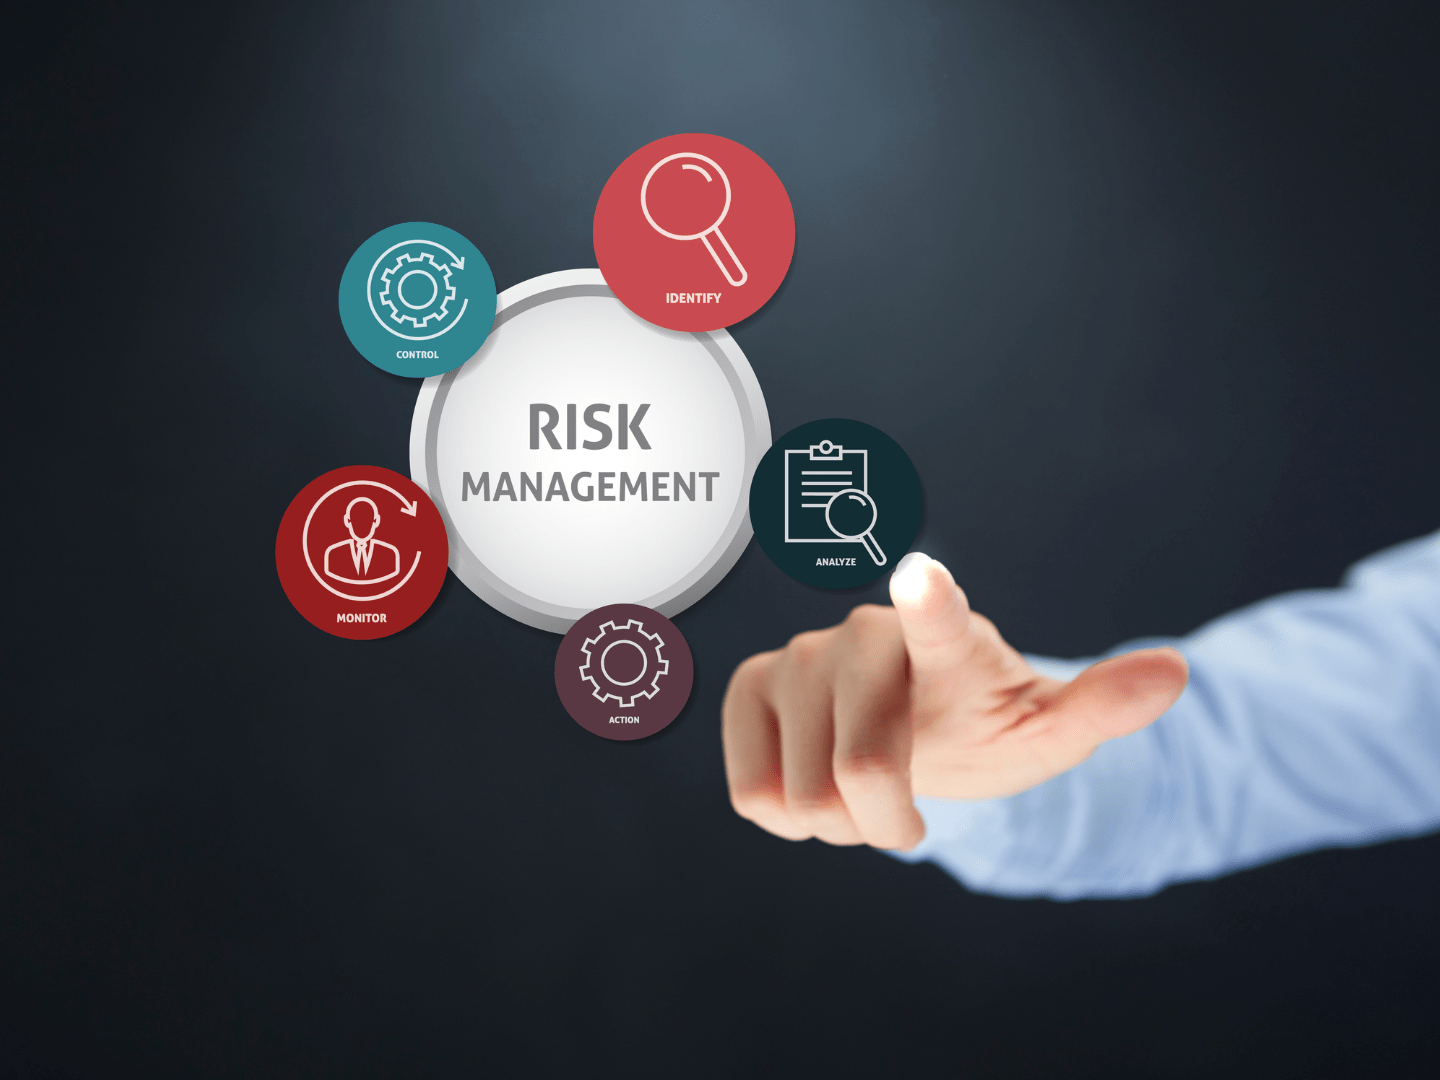 5 Steps To Build a Risk Management Process for Your Business